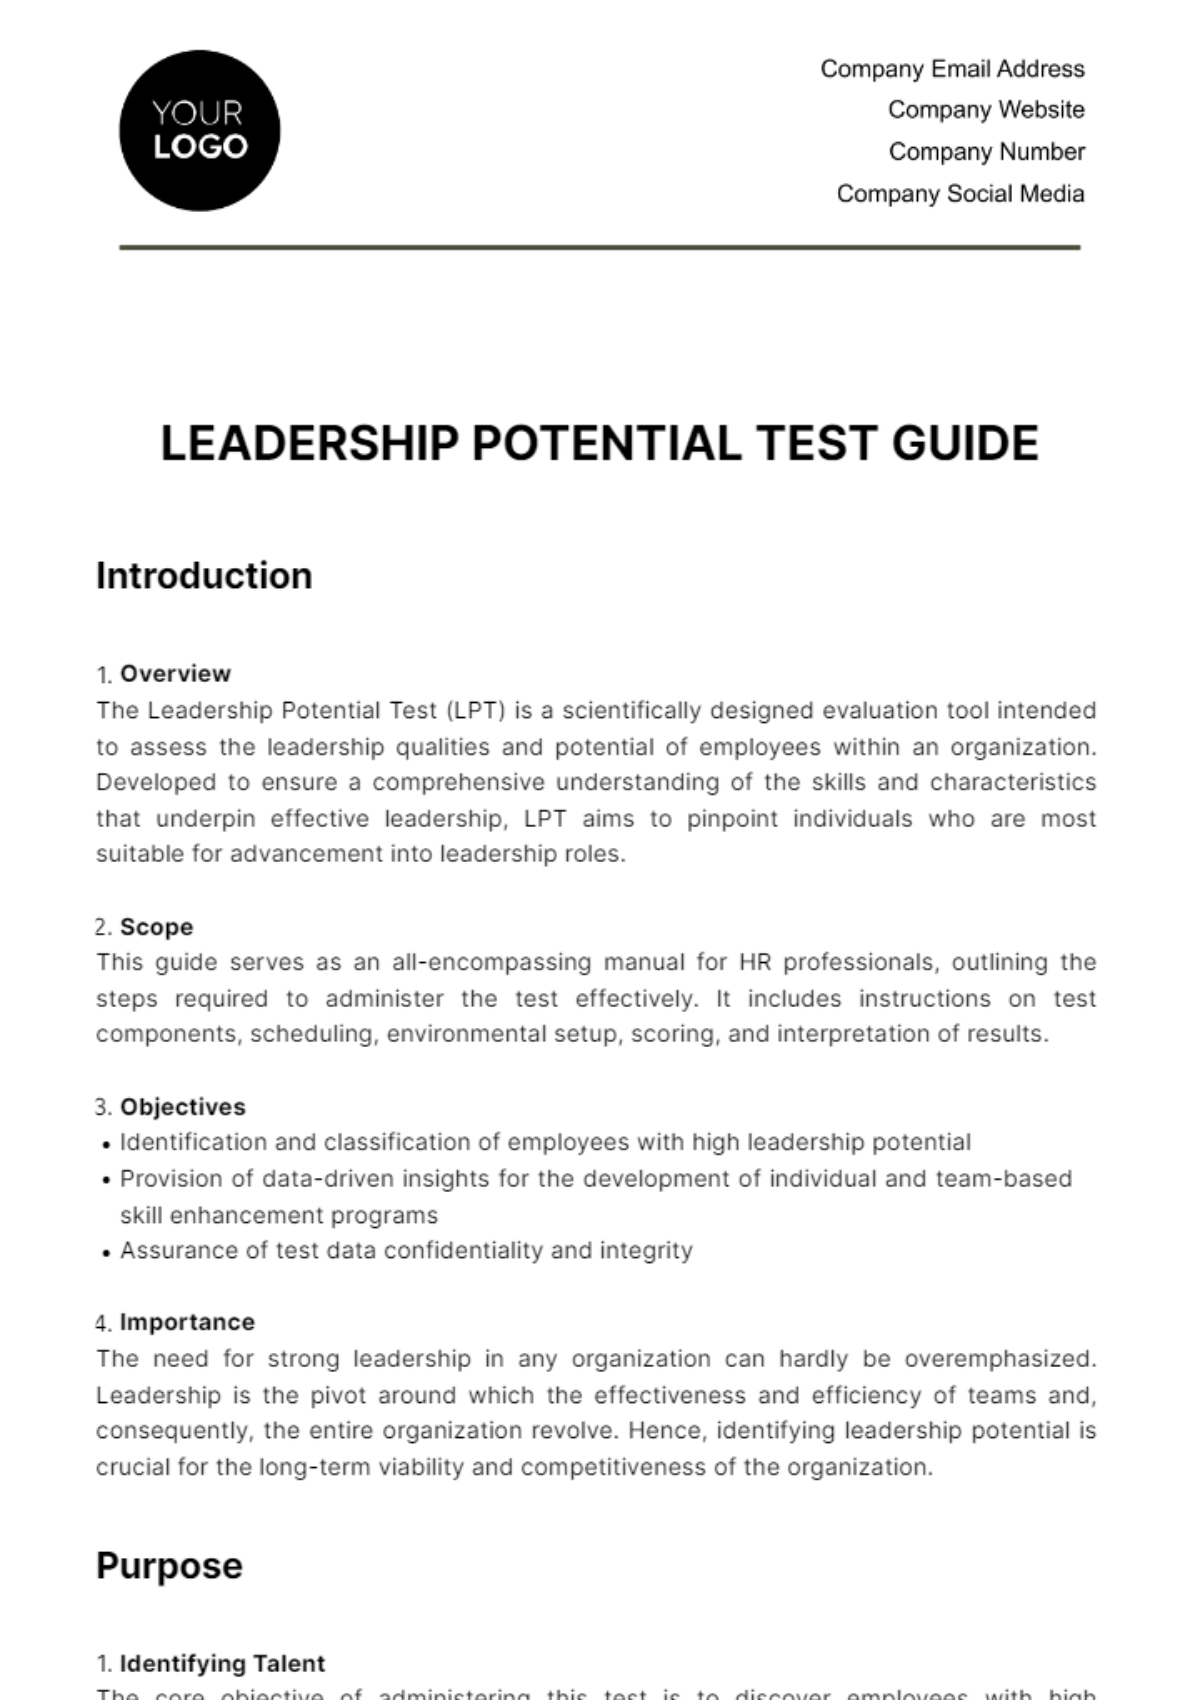 Leadership Potential Test Guide HR Template